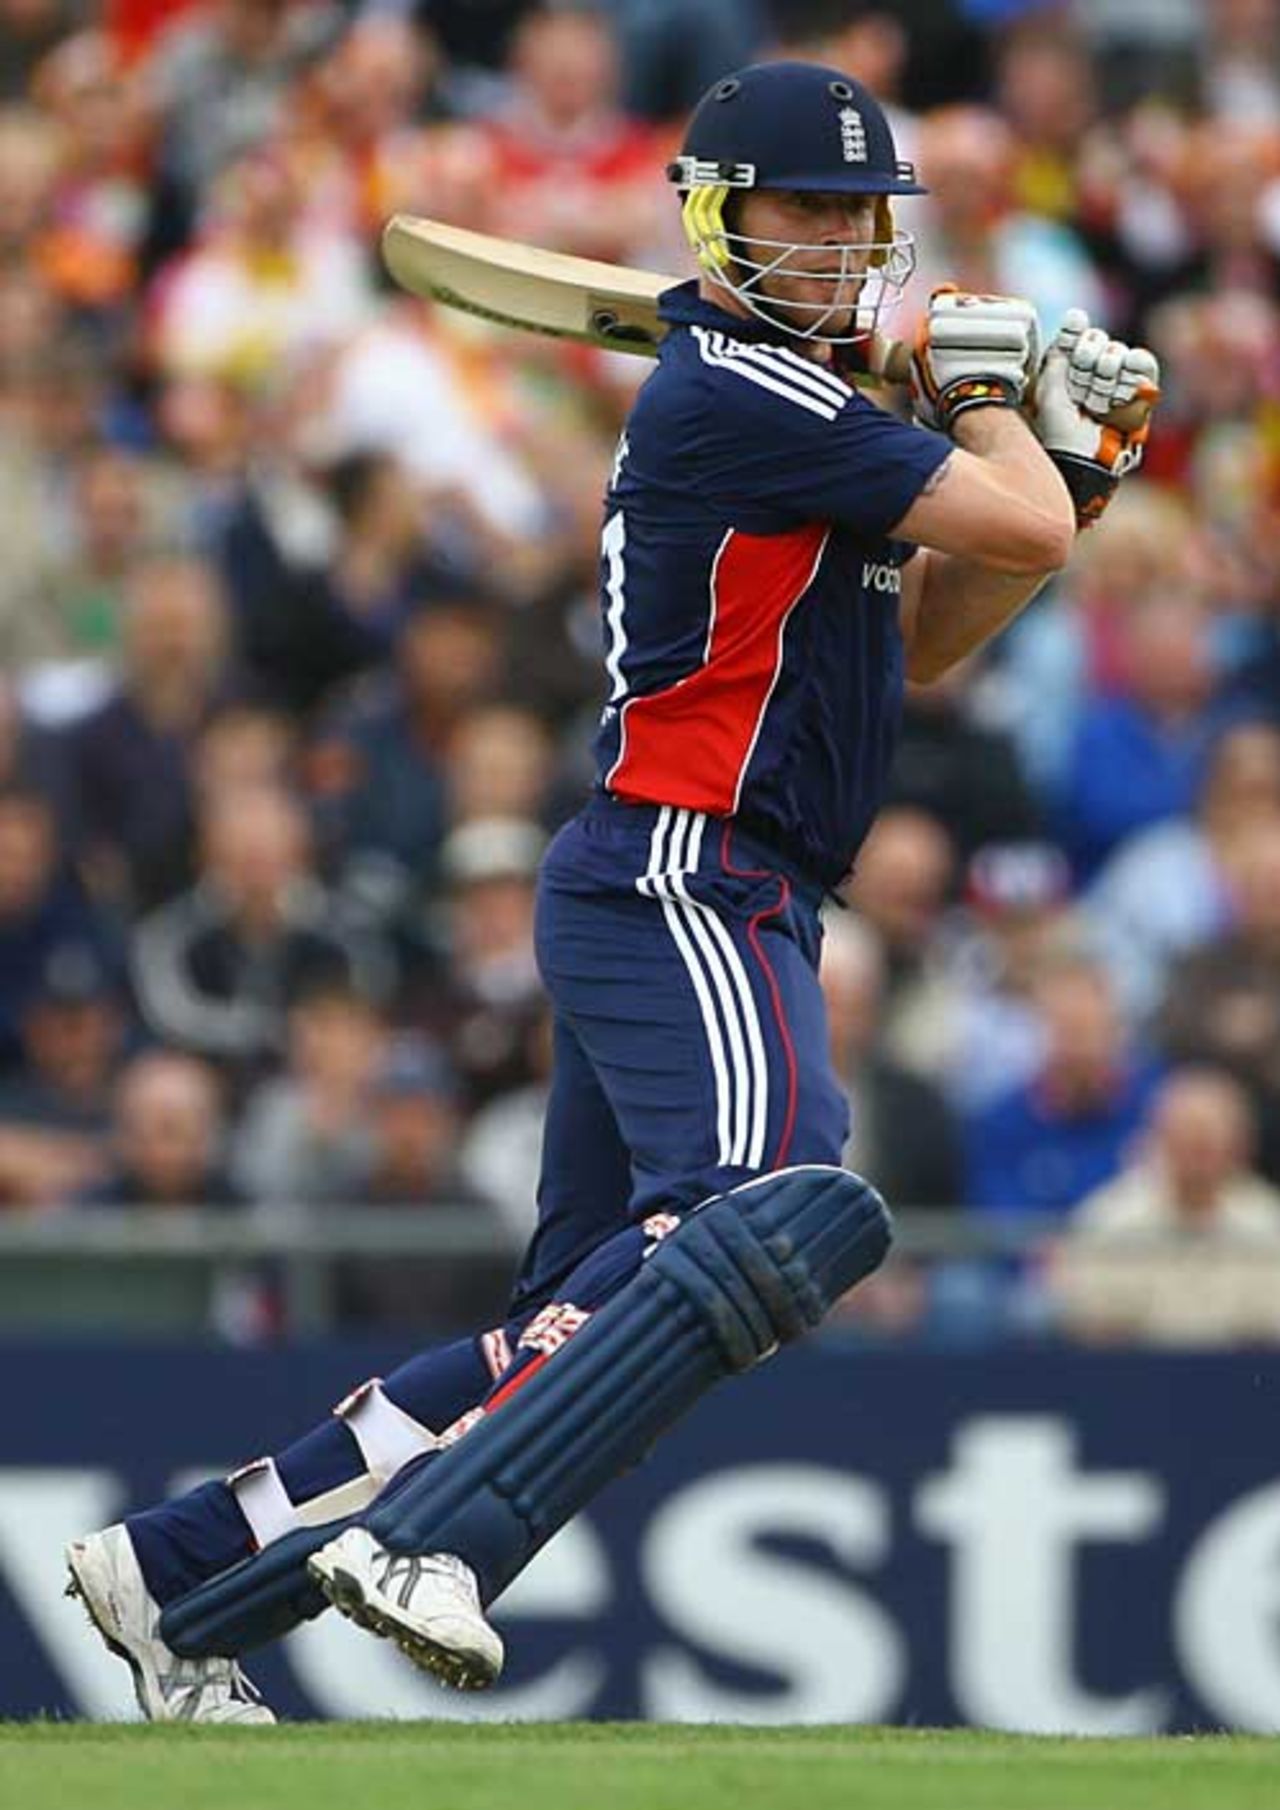 Andrew Flintoff drives square during his 78, England v South Africa, 1st ODI, Headingley, August 22, 2008